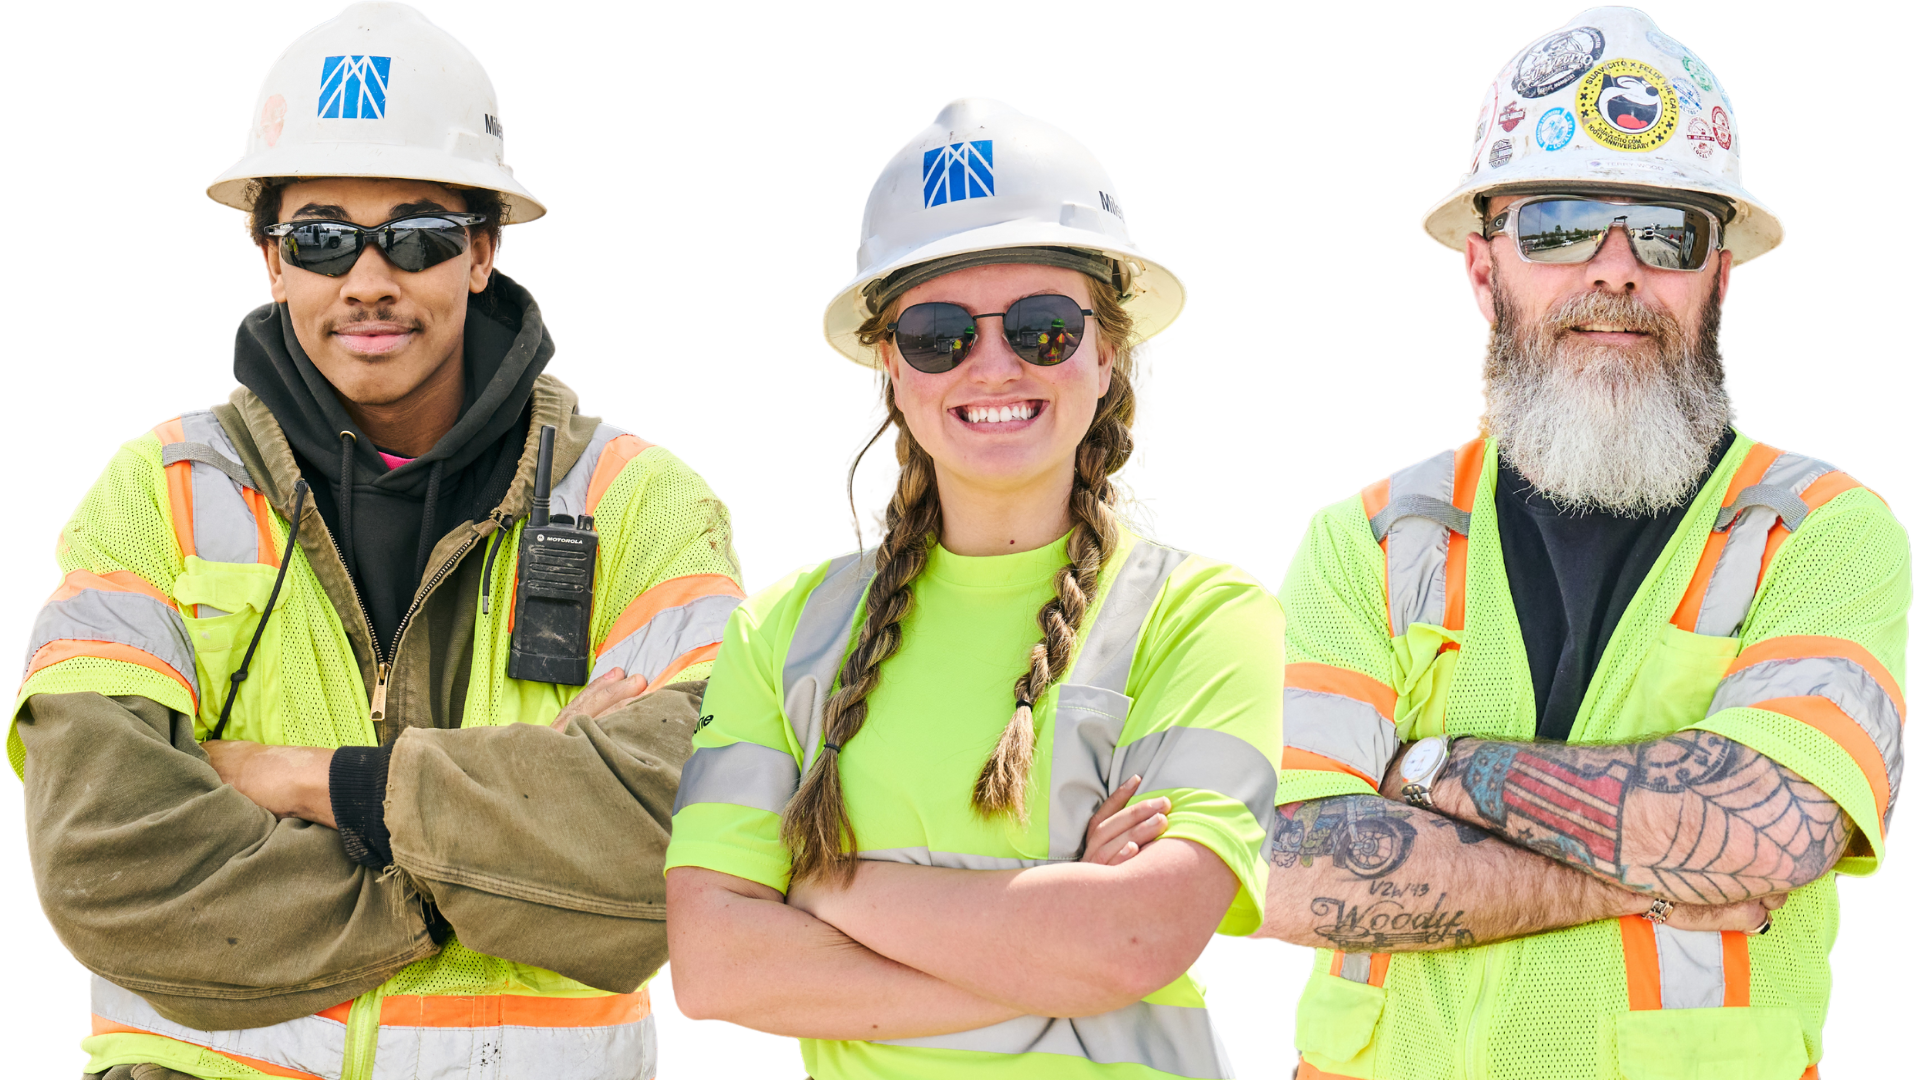 Diverse construction workers posed together